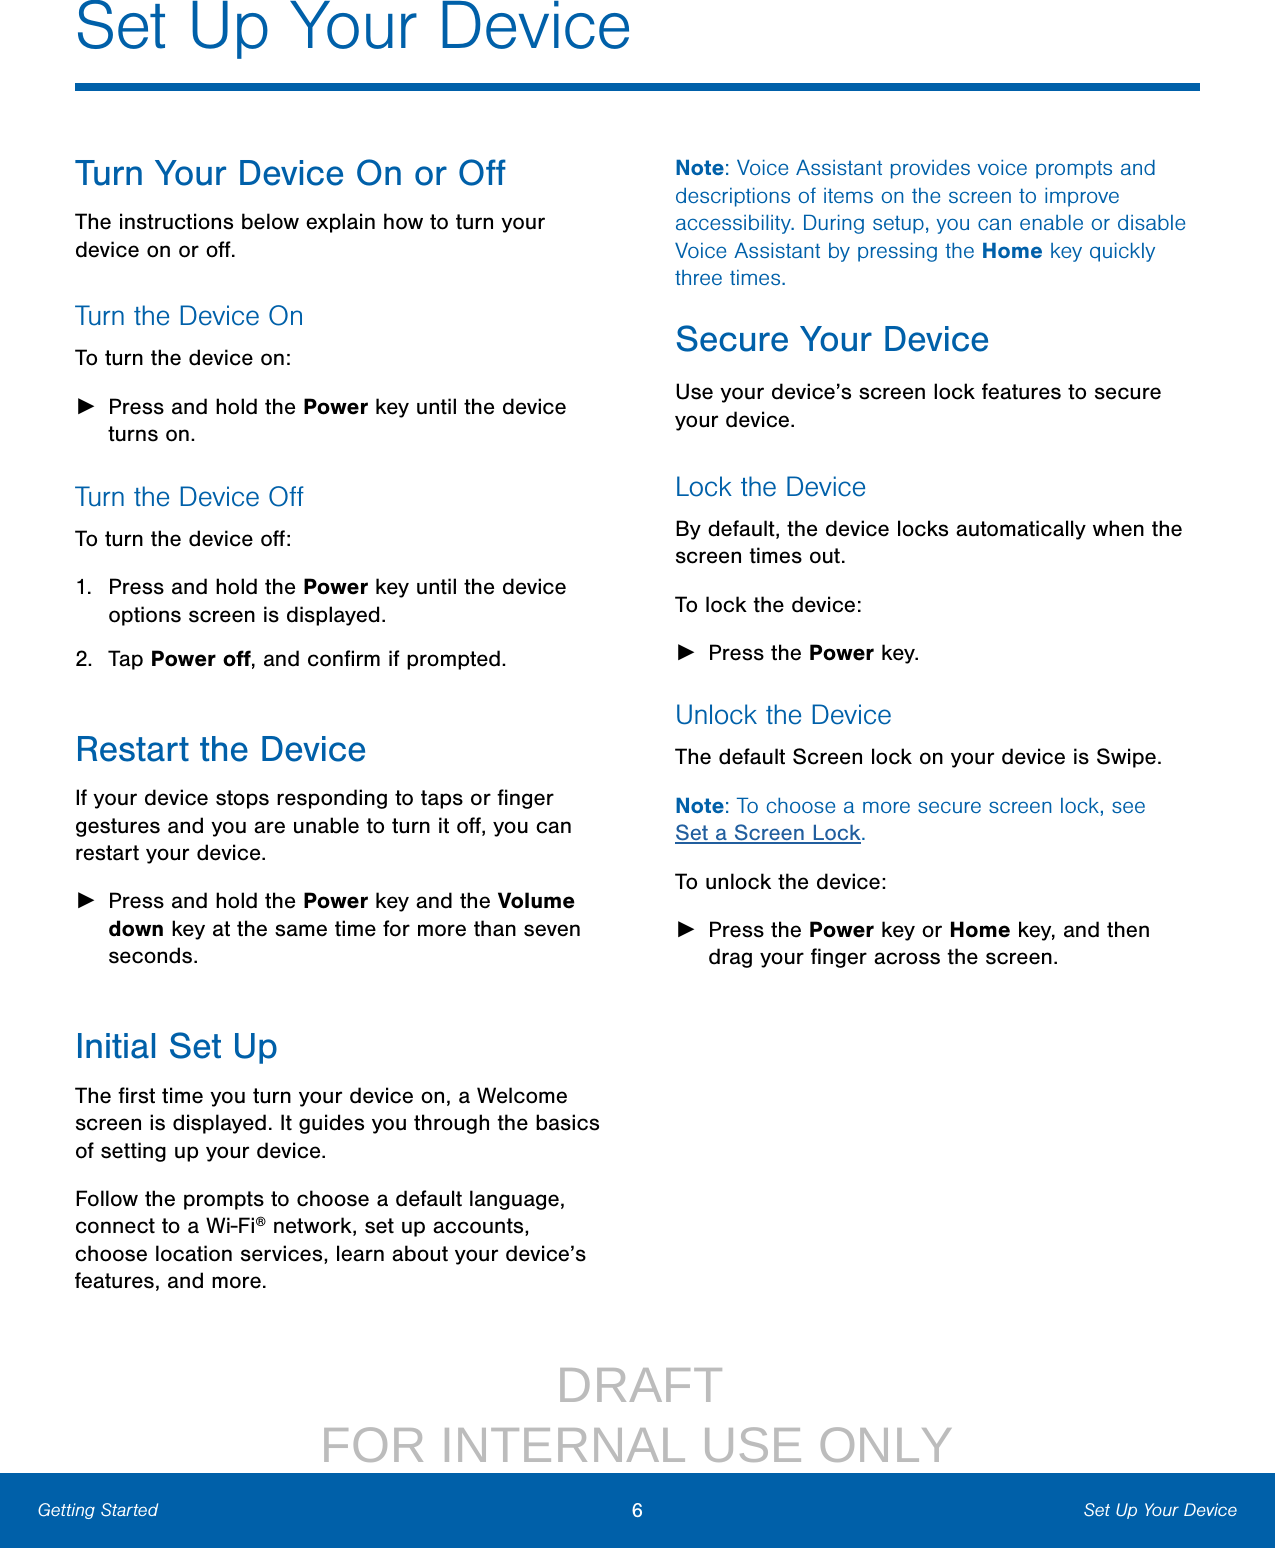                  DRAFT FOR INTERNAL USE ONLY6Set Up Your DeviceGetting StartedTurn Your Device On or OﬀThe instructions below explain how to turn your device on or oﬀ.Turn the Device OnTo turn the device on: ►Press and hold the Power key until the device turns on.Turn the Device OﬀTo turn the device oﬀ:1.  Press and hold the Power key until the device options screen is displayed.2.  Tap Power oﬀ, and conﬁrm if prompted.Restart the DeviceIf your device stops responding to taps or ﬁnger gestures and you are unable to turn it oﬀ, you can restart your device. ►Press and hold the Power key and the Volume down key at the same time for more than seven seconds.Initial Set UpThe ﬁrst time you turn your device on, a Welcome screen is displayed. It guides you through the basics of setting up your device.Follow the prompts to choose a default language, connect to a Wi‑Fi® network, set up accounts, choose location services, learn about your device’s features, and more.Note: Voice Assistant provides voice prompts and descriptions of items on the screen to improve accessibility. During setup, you can enable or disable Voice Assistant by pressing the Home key quickly three times.Secure Your DeviceUse your device’s screen lock features to secure your device.Lock the DeviceBy default, the device locks automatically when the screen times out.To lock the device: ►Press the Power key.Unlock the DeviceThe default Screen lock on your device is Swipe.Note: To choose a more secure screen lock, see Set a Screen Lock.To unlock the device: ►Press the Power key or Home key, and then drag your ﬁnger across the screen.Set Up Your Device